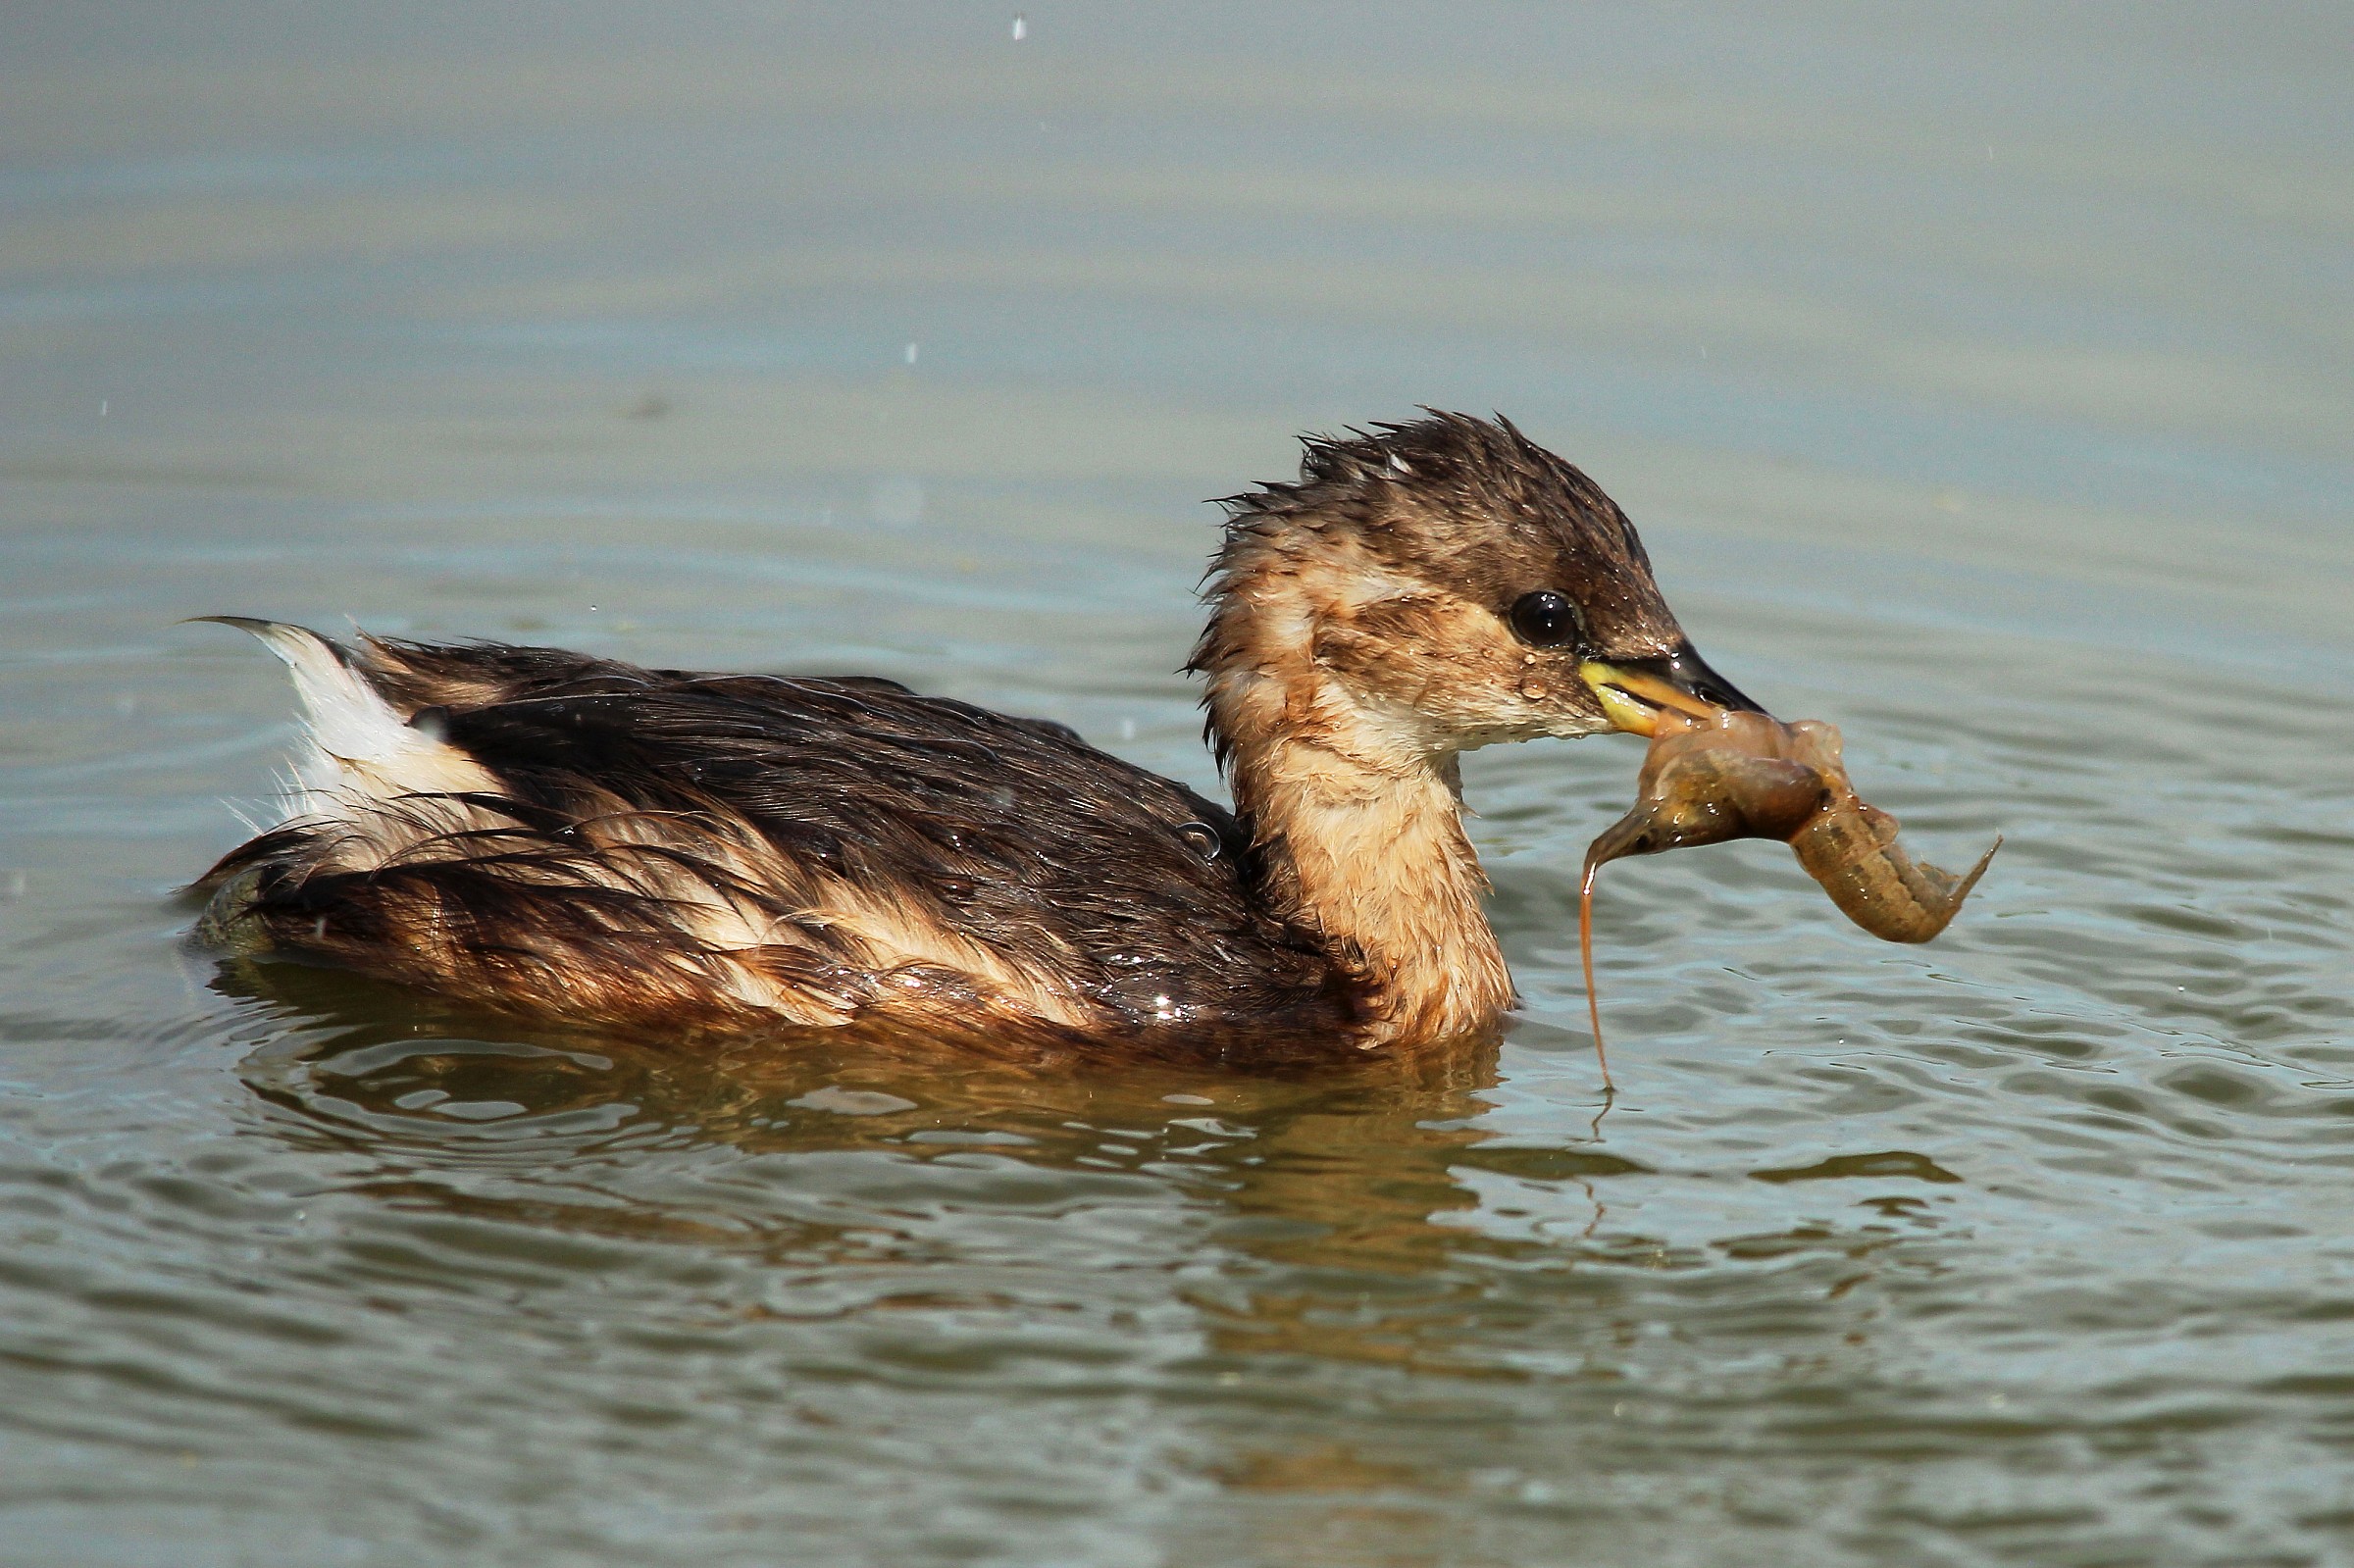 Little Grebe hungry...